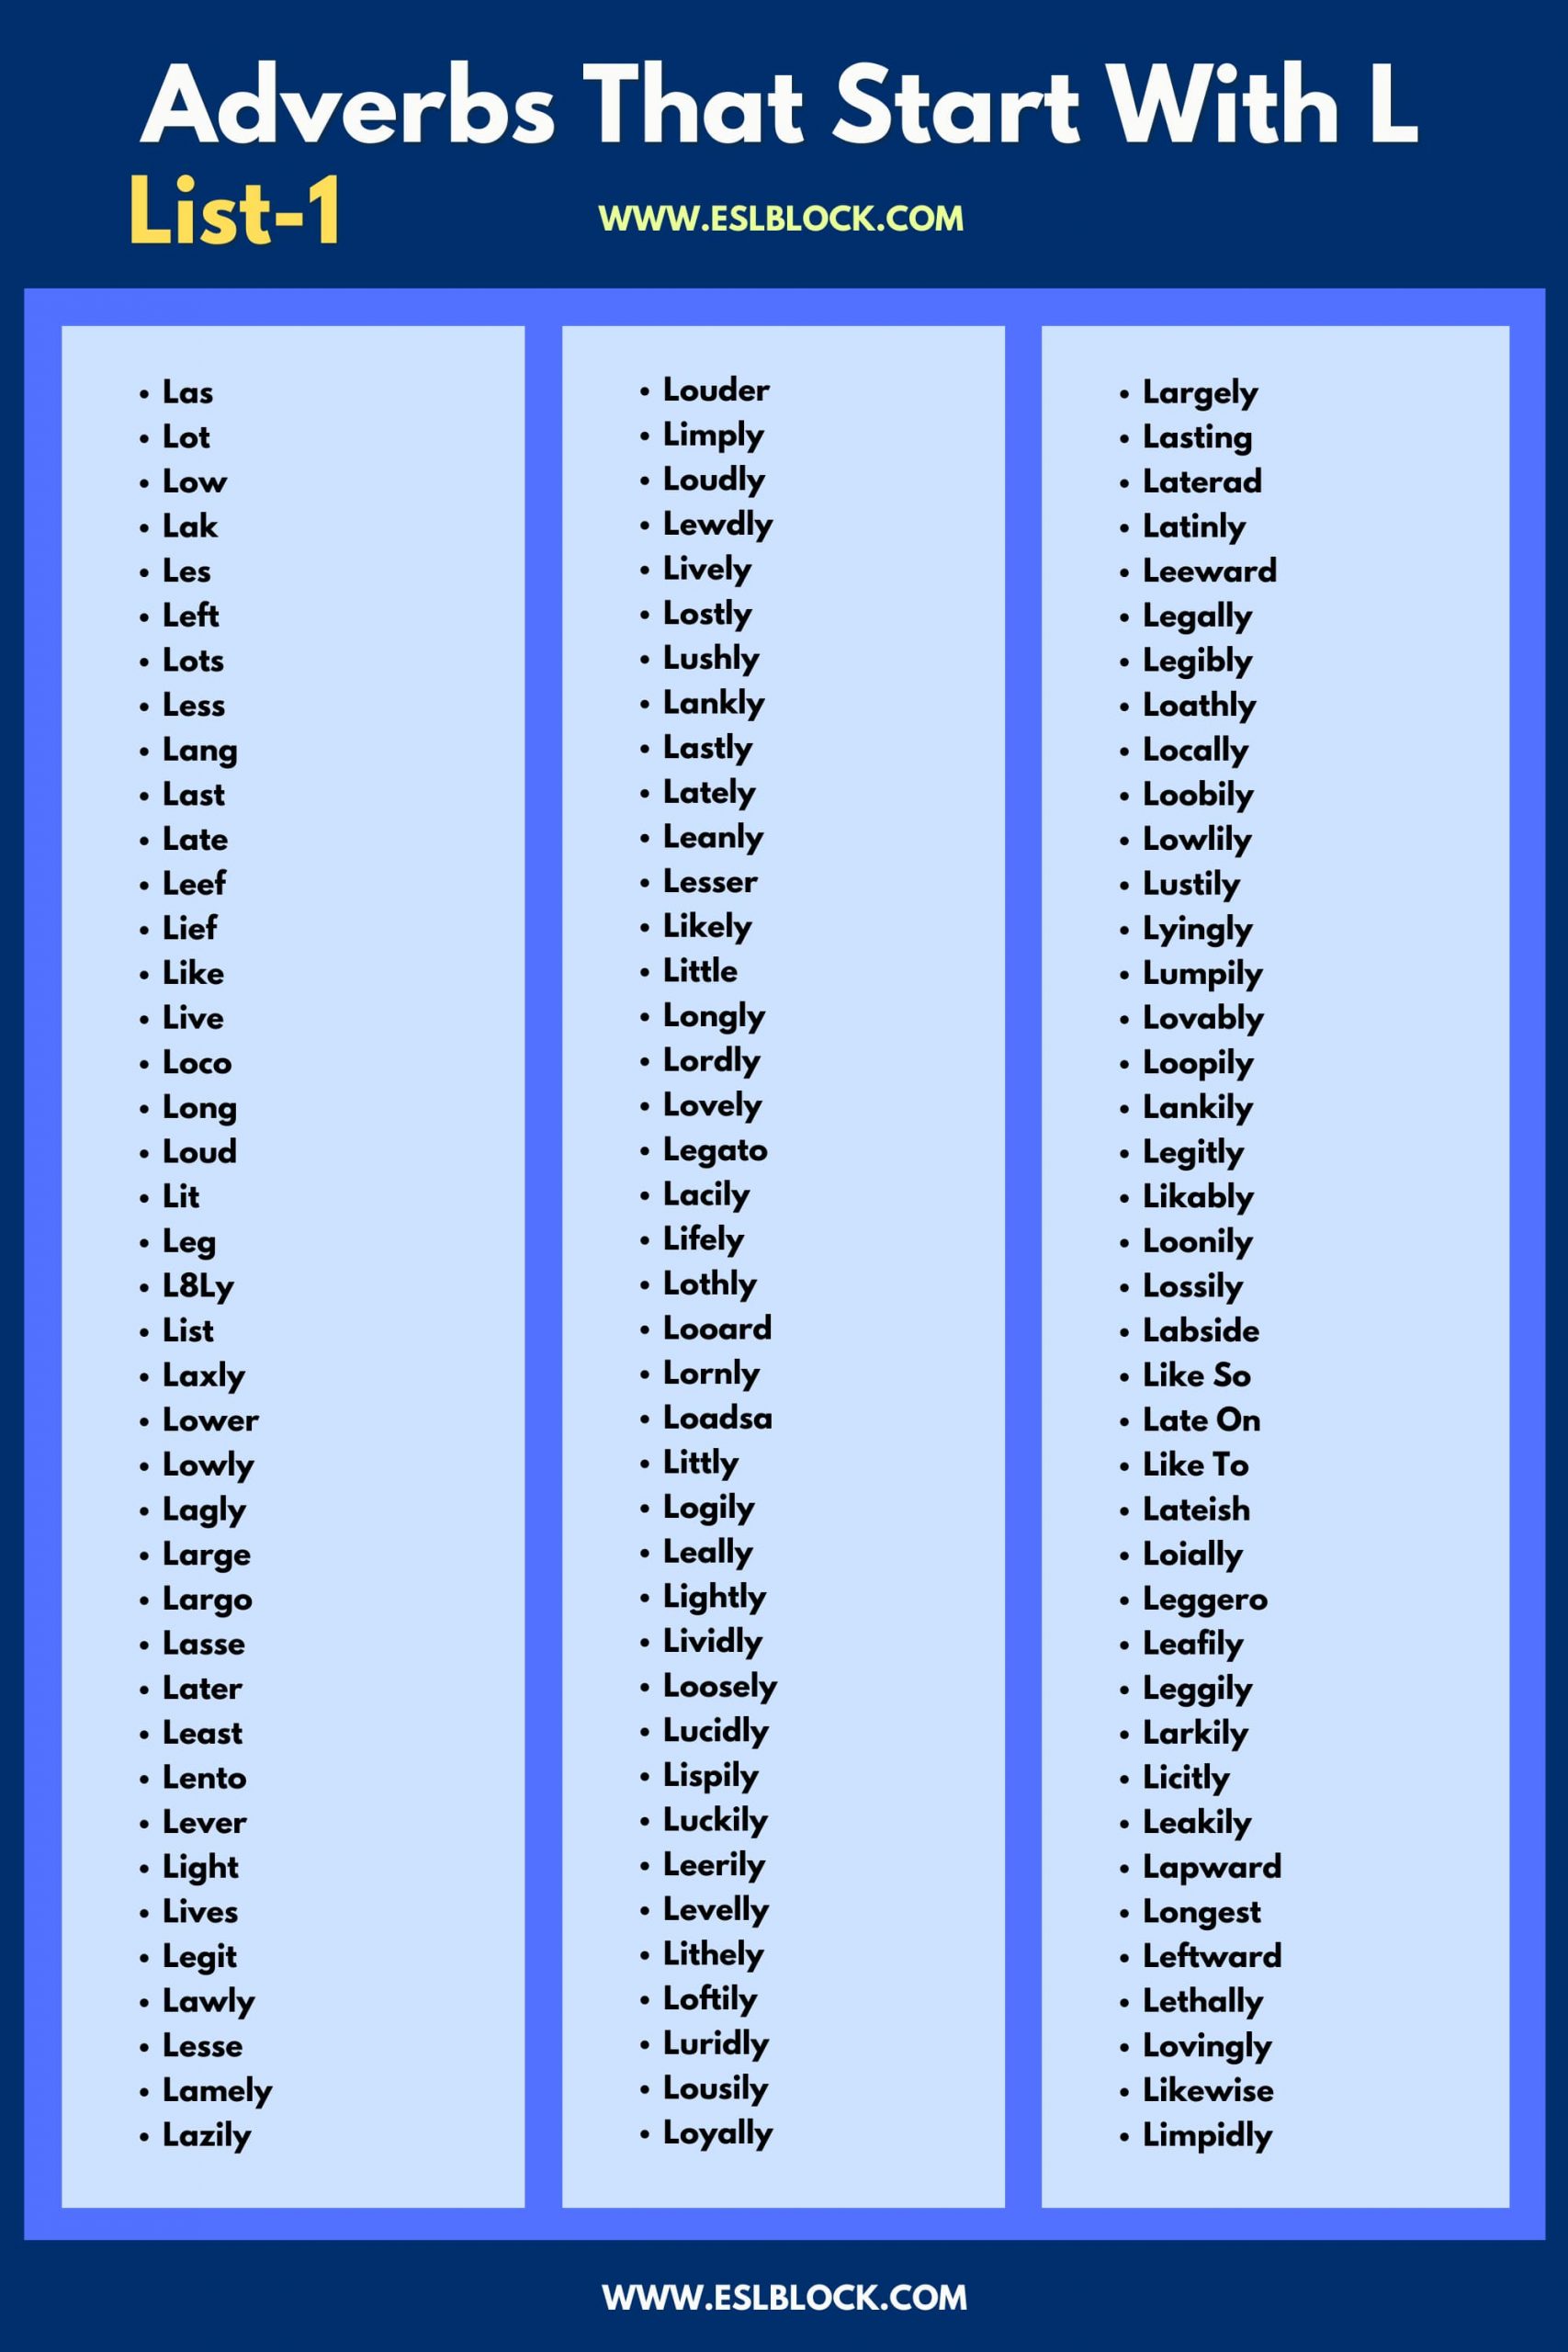 100 Example Sentences Using Adverbs, 4 Letter Adverbs That Start with L, 4 Letter Words, 5 Letter Adverbs That Start with L, 5 Letter Words, 6 Letter Adverbs That Start with L, 6 Letter Words, A to Z Adverbs, AA Adverbs, Adverb vocabulary words, Adverbs, Adverbs That Start with L, Adverbs with Example Sentences, All Adverbs, Types of Adverbs, Types of Adverbs with Example Sentences, Vocabulary, What are Adverbs, What are the types of Adverbs, Words That with L